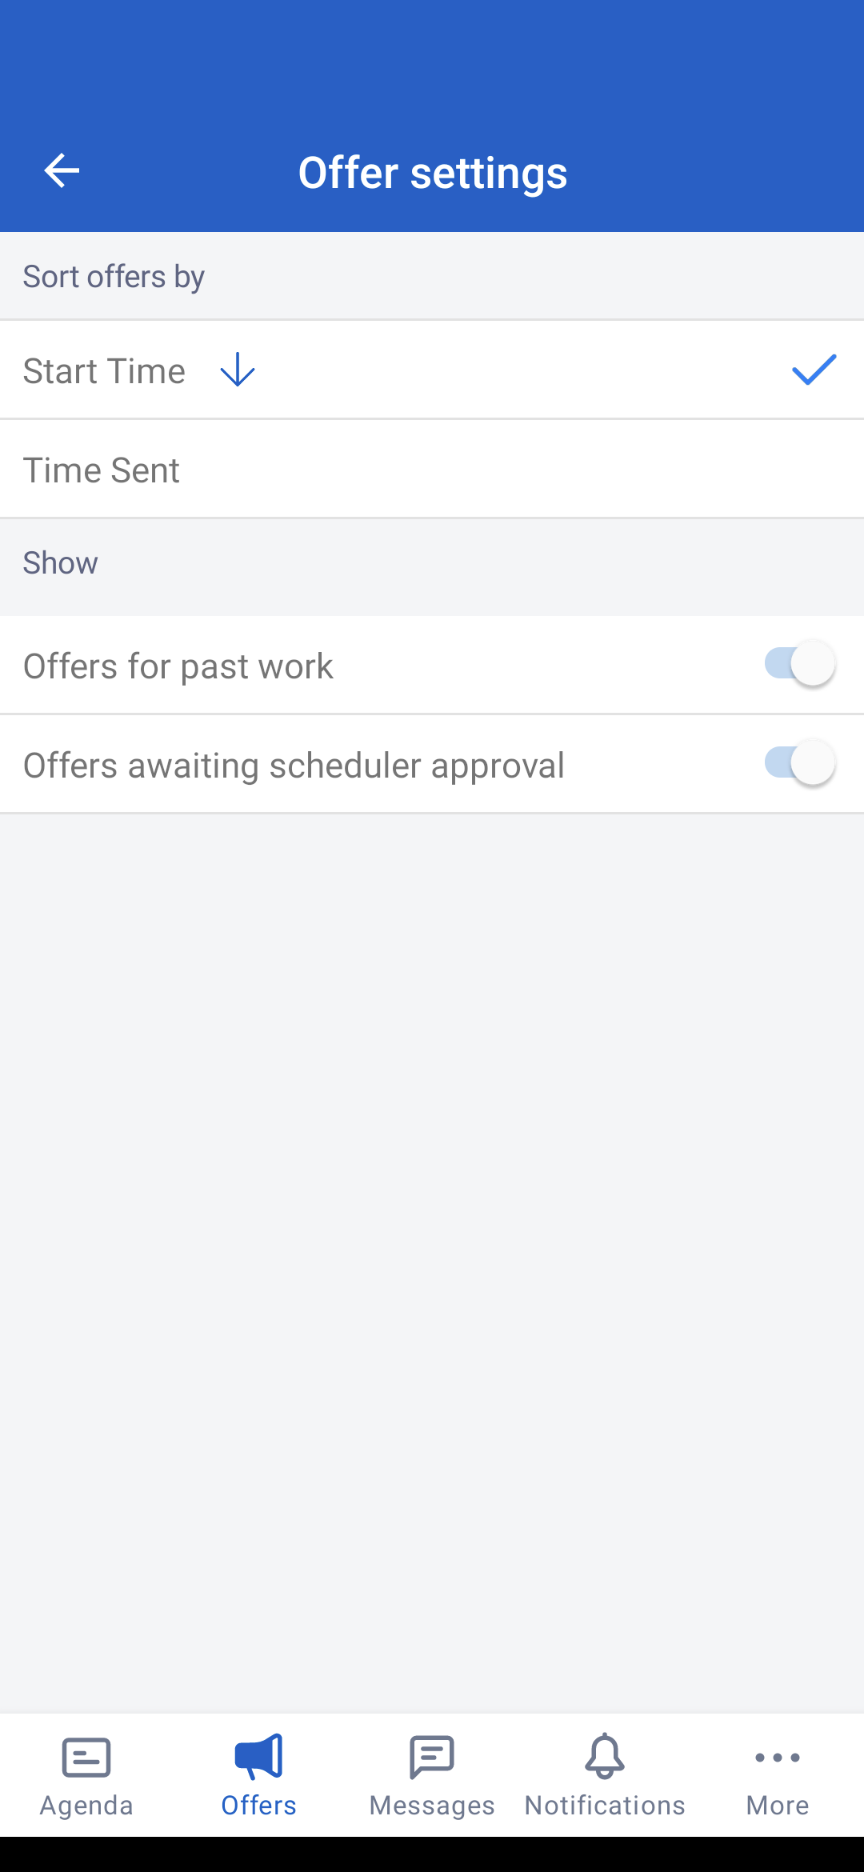 Sort and filter offers in the Offer settings screen.